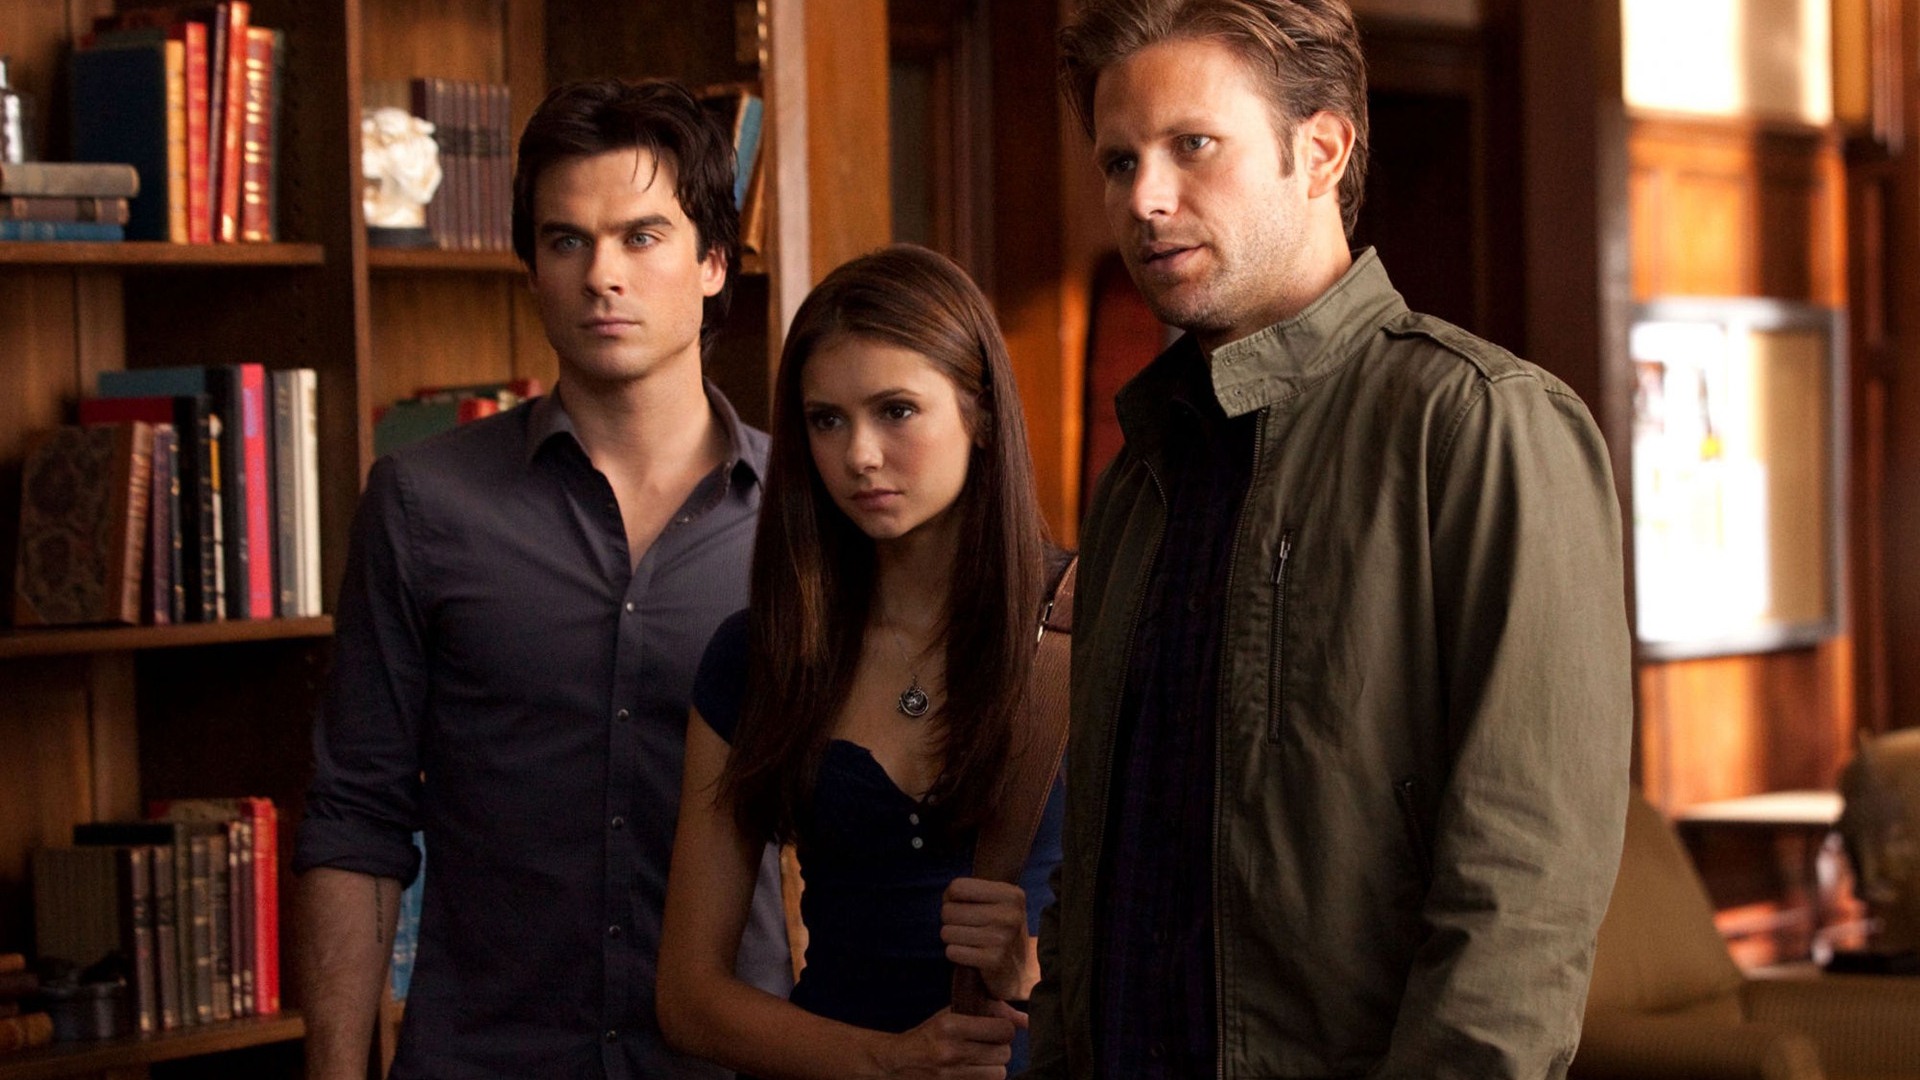 The Vampire Diaries wallpapers HD #2 - 1920x1080